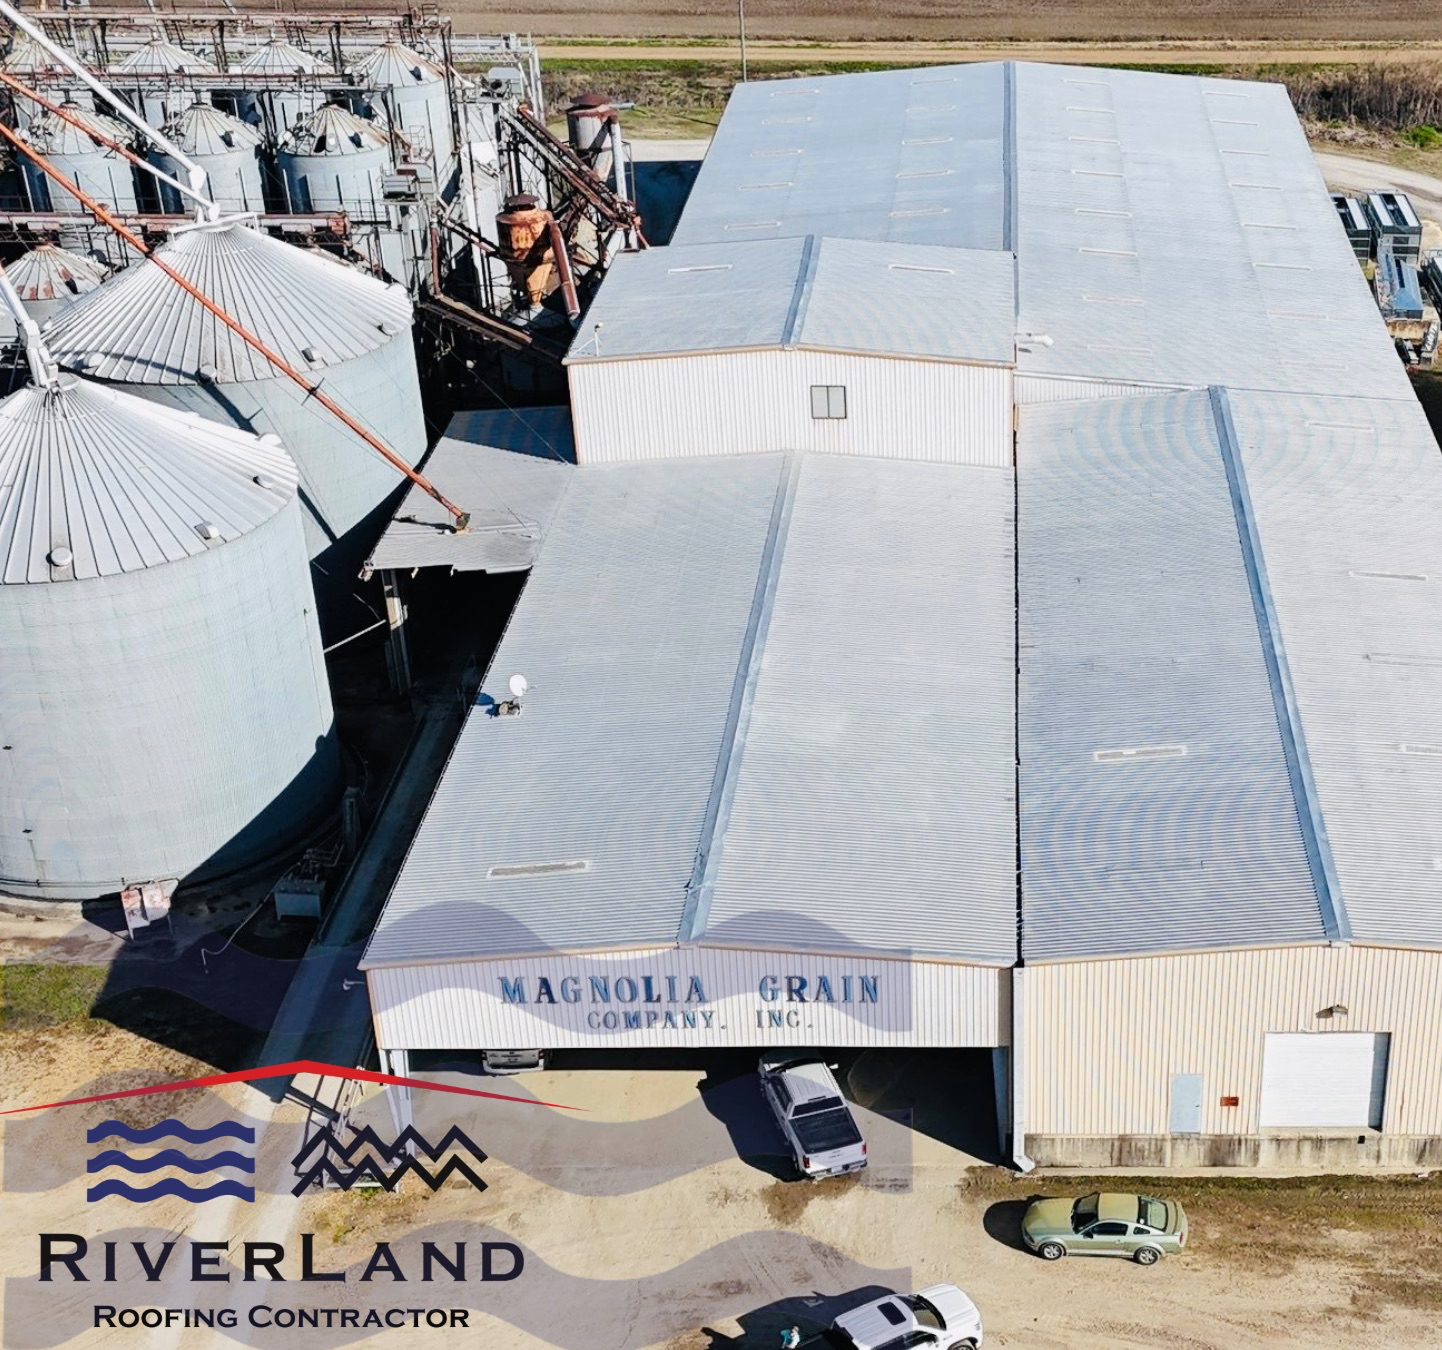 At RiverLand, we do agriculture! 
Check out these before and after photos of Magnolia Grain! This roof previously had an